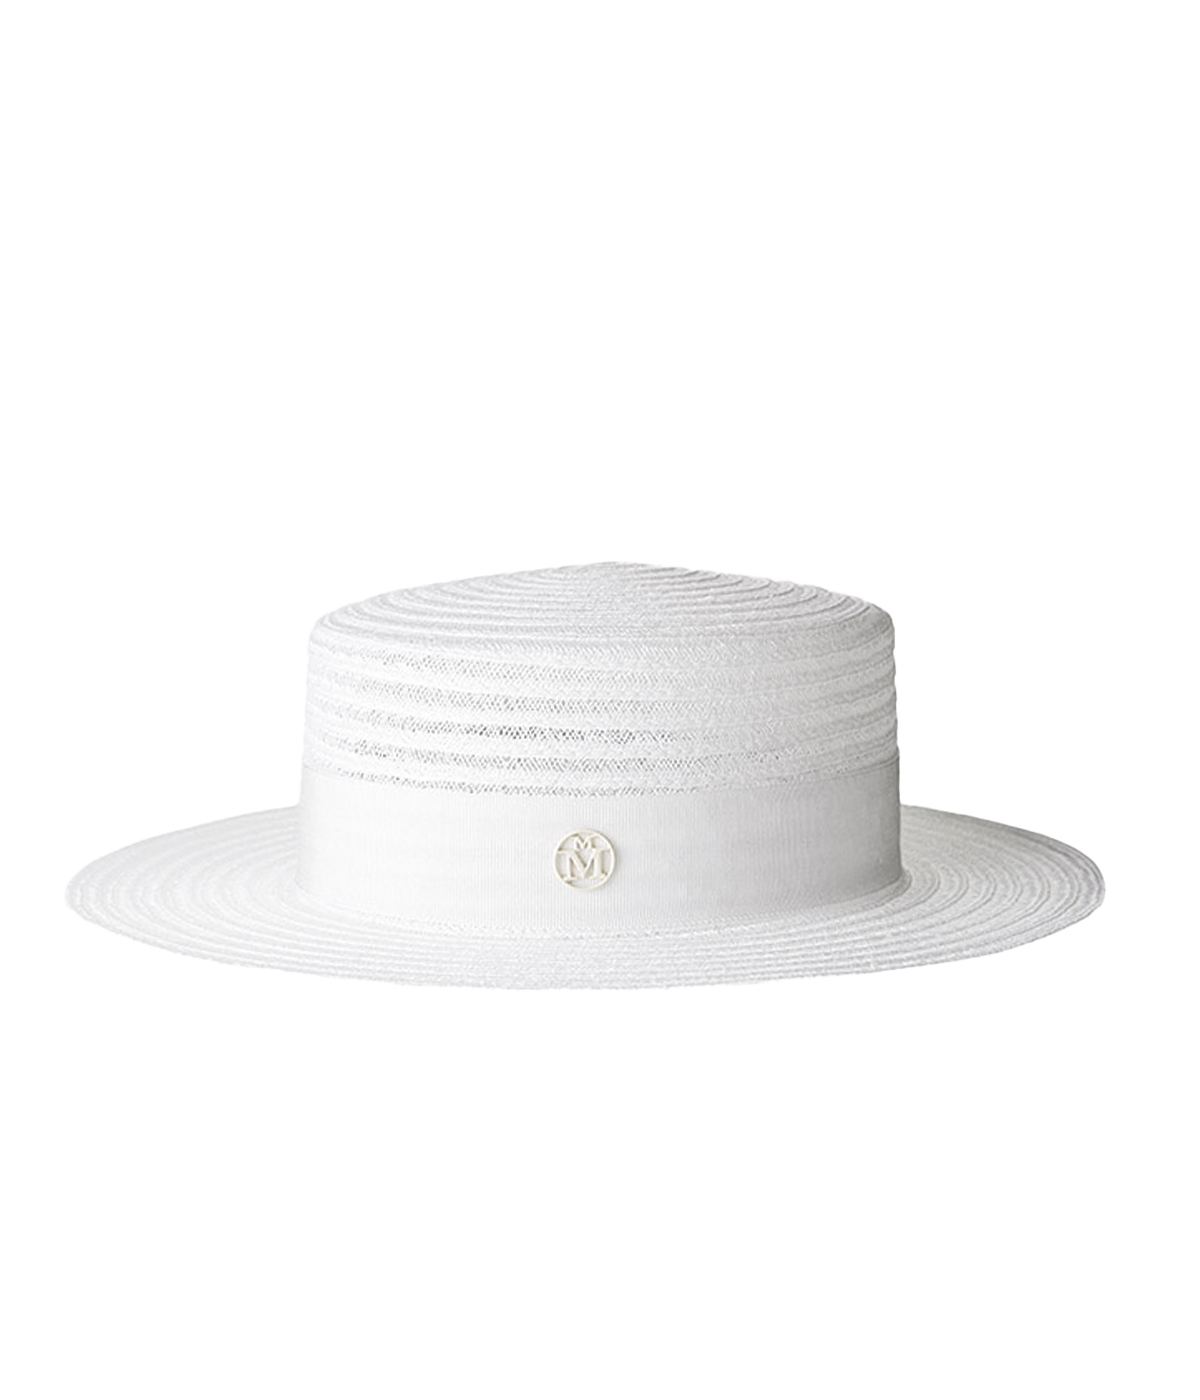 Crafted from woven hemp, this timeless white canotier hat has a flat top and brim. Perfect for a day at the races or the polo. 